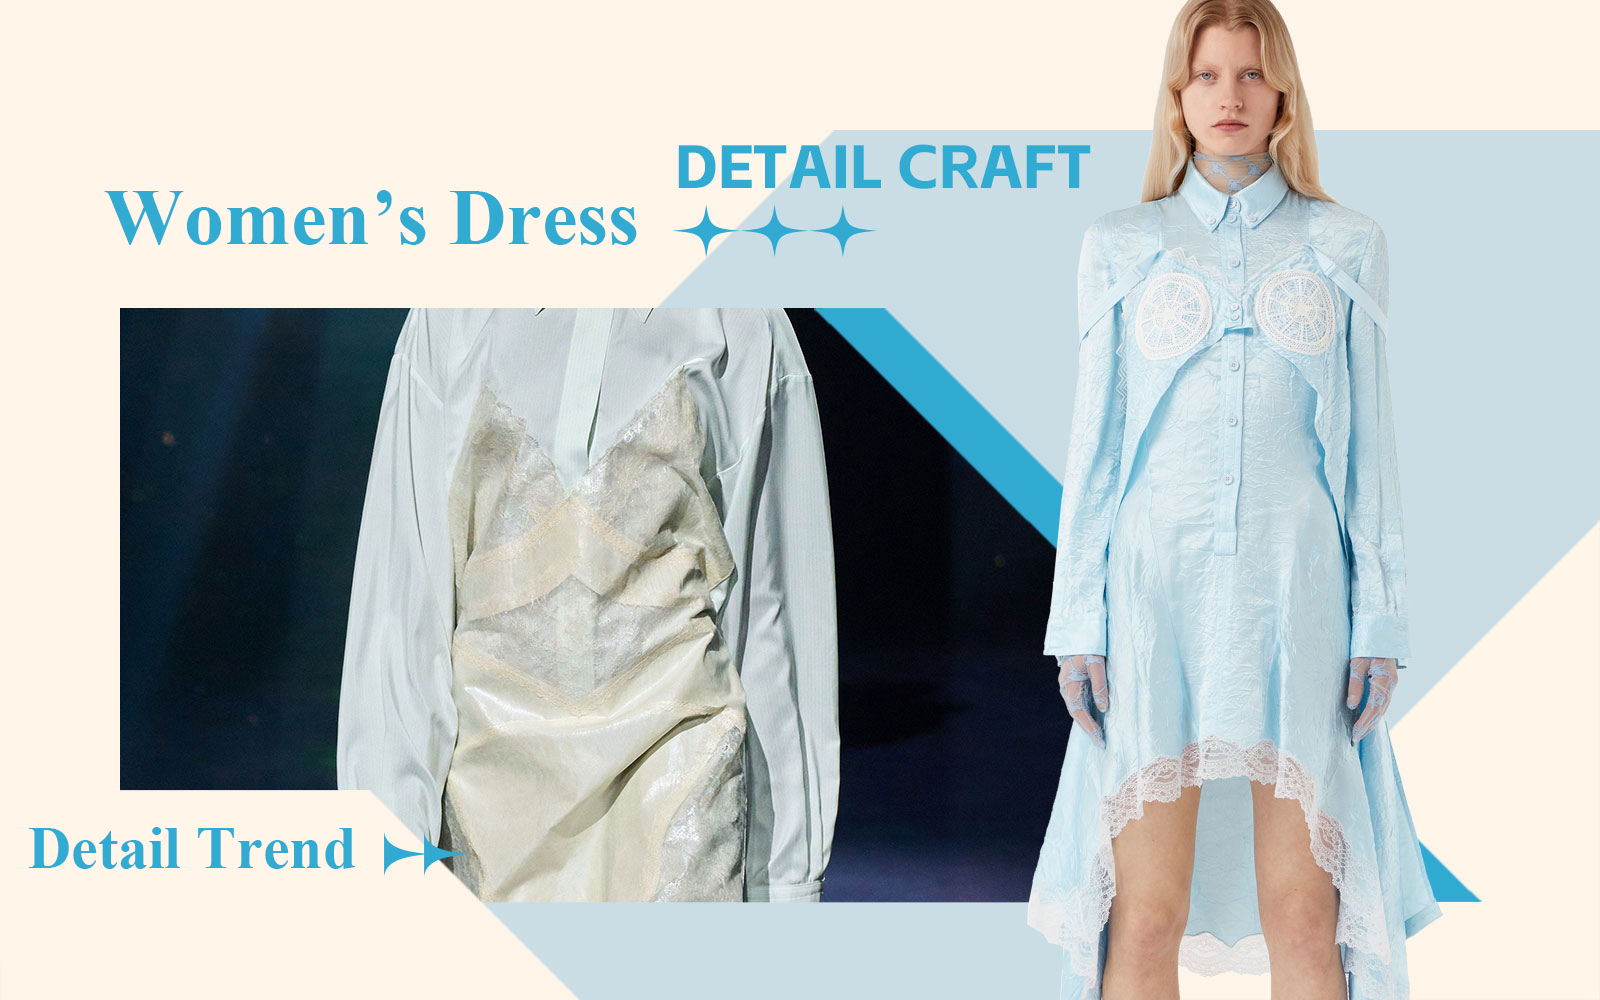 The Detail & Craft Trend for Women's Dress